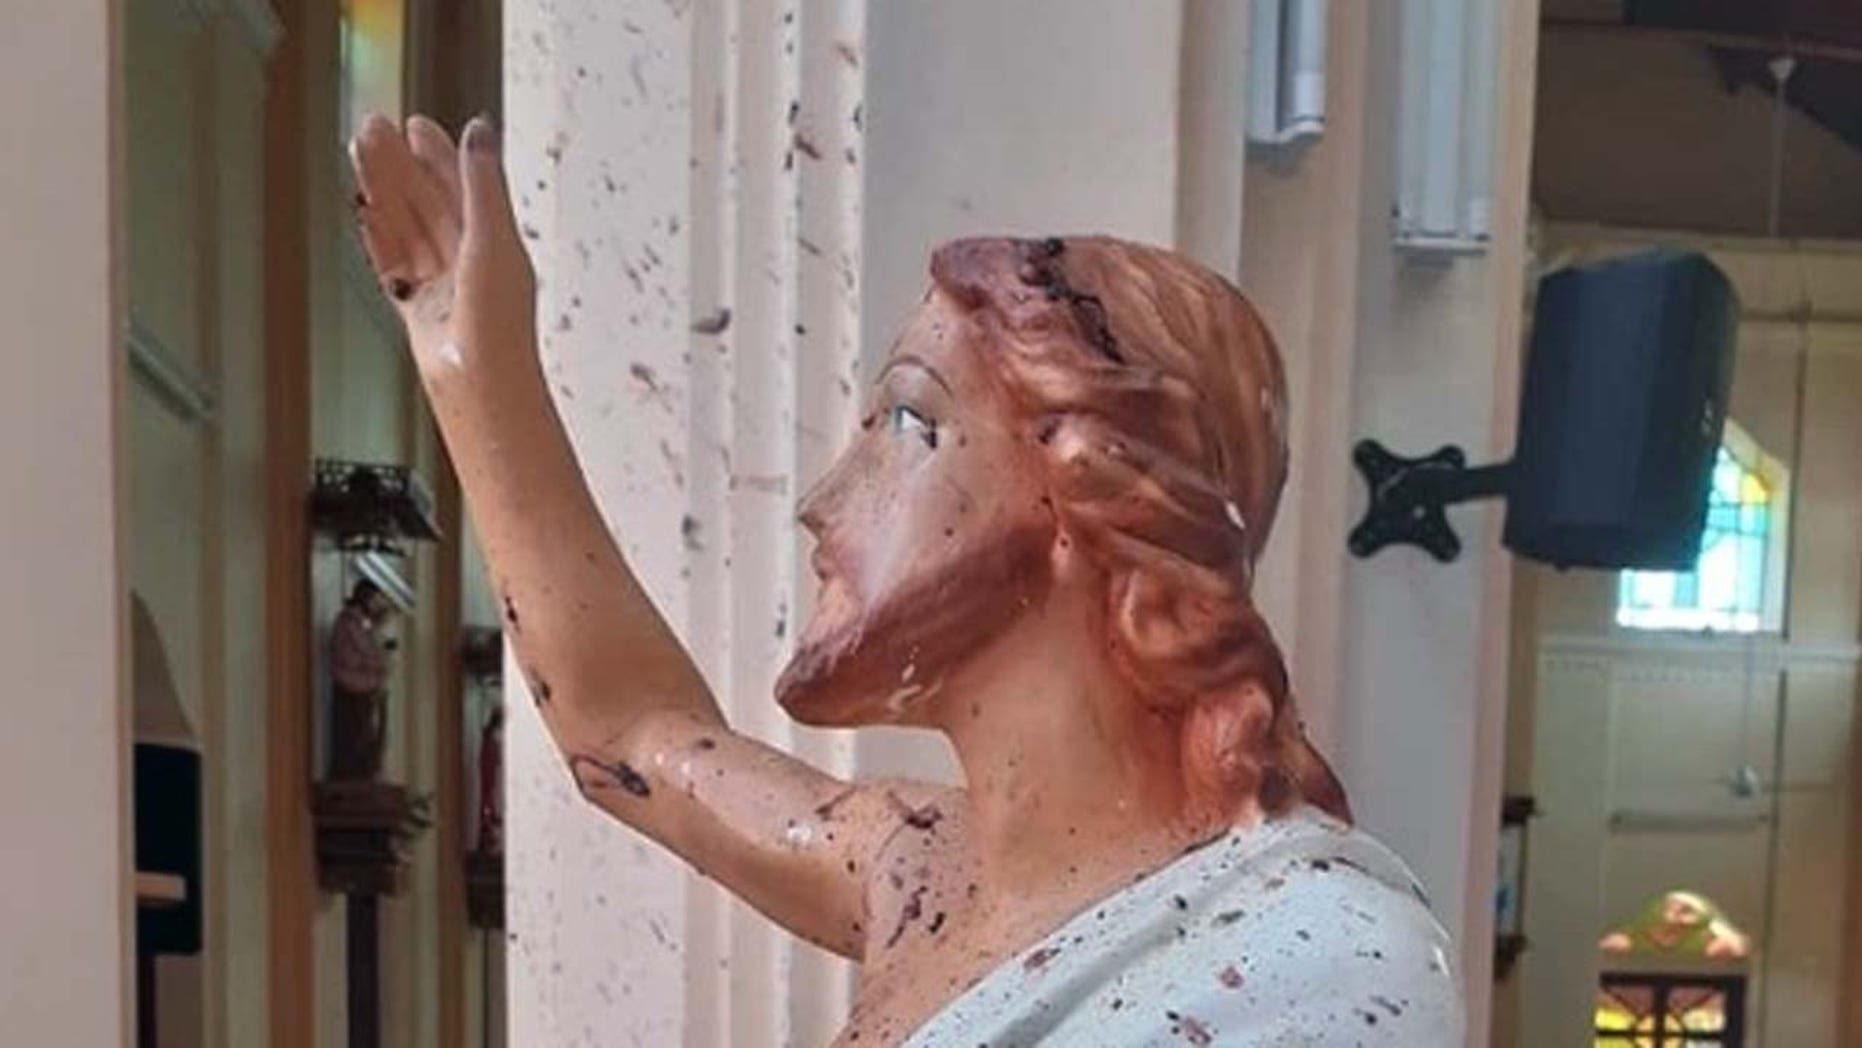 A blood-spattered statue of Jesus from the St. Sebastian church in Sri Lanka, after Islamic militants bombed the church in an Easter Sunday massacre.